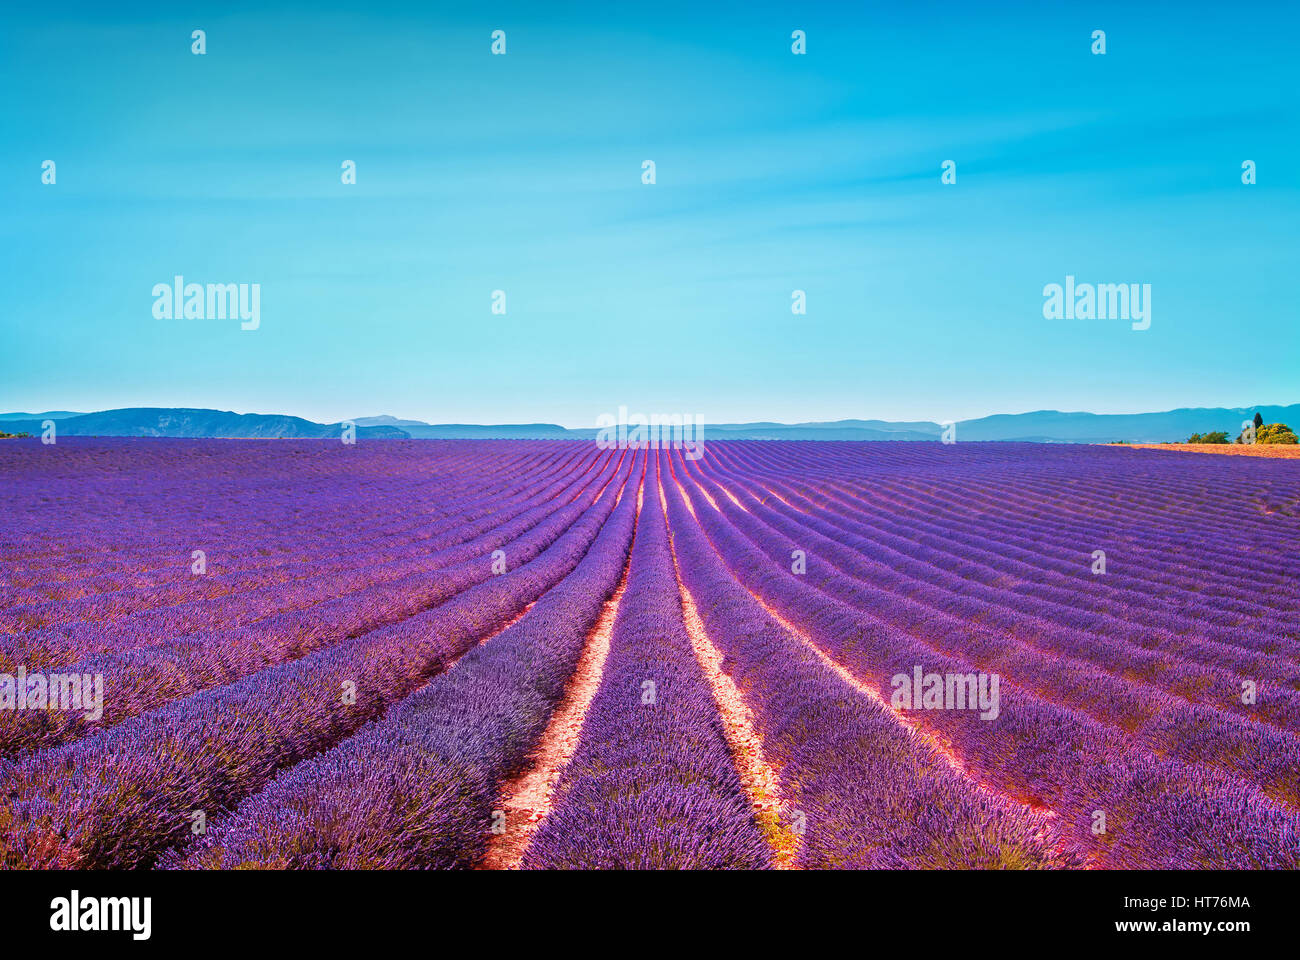 Lavender flowers blooming field and clear sky. Valensole, Provence, France, Europe. Stock Photo